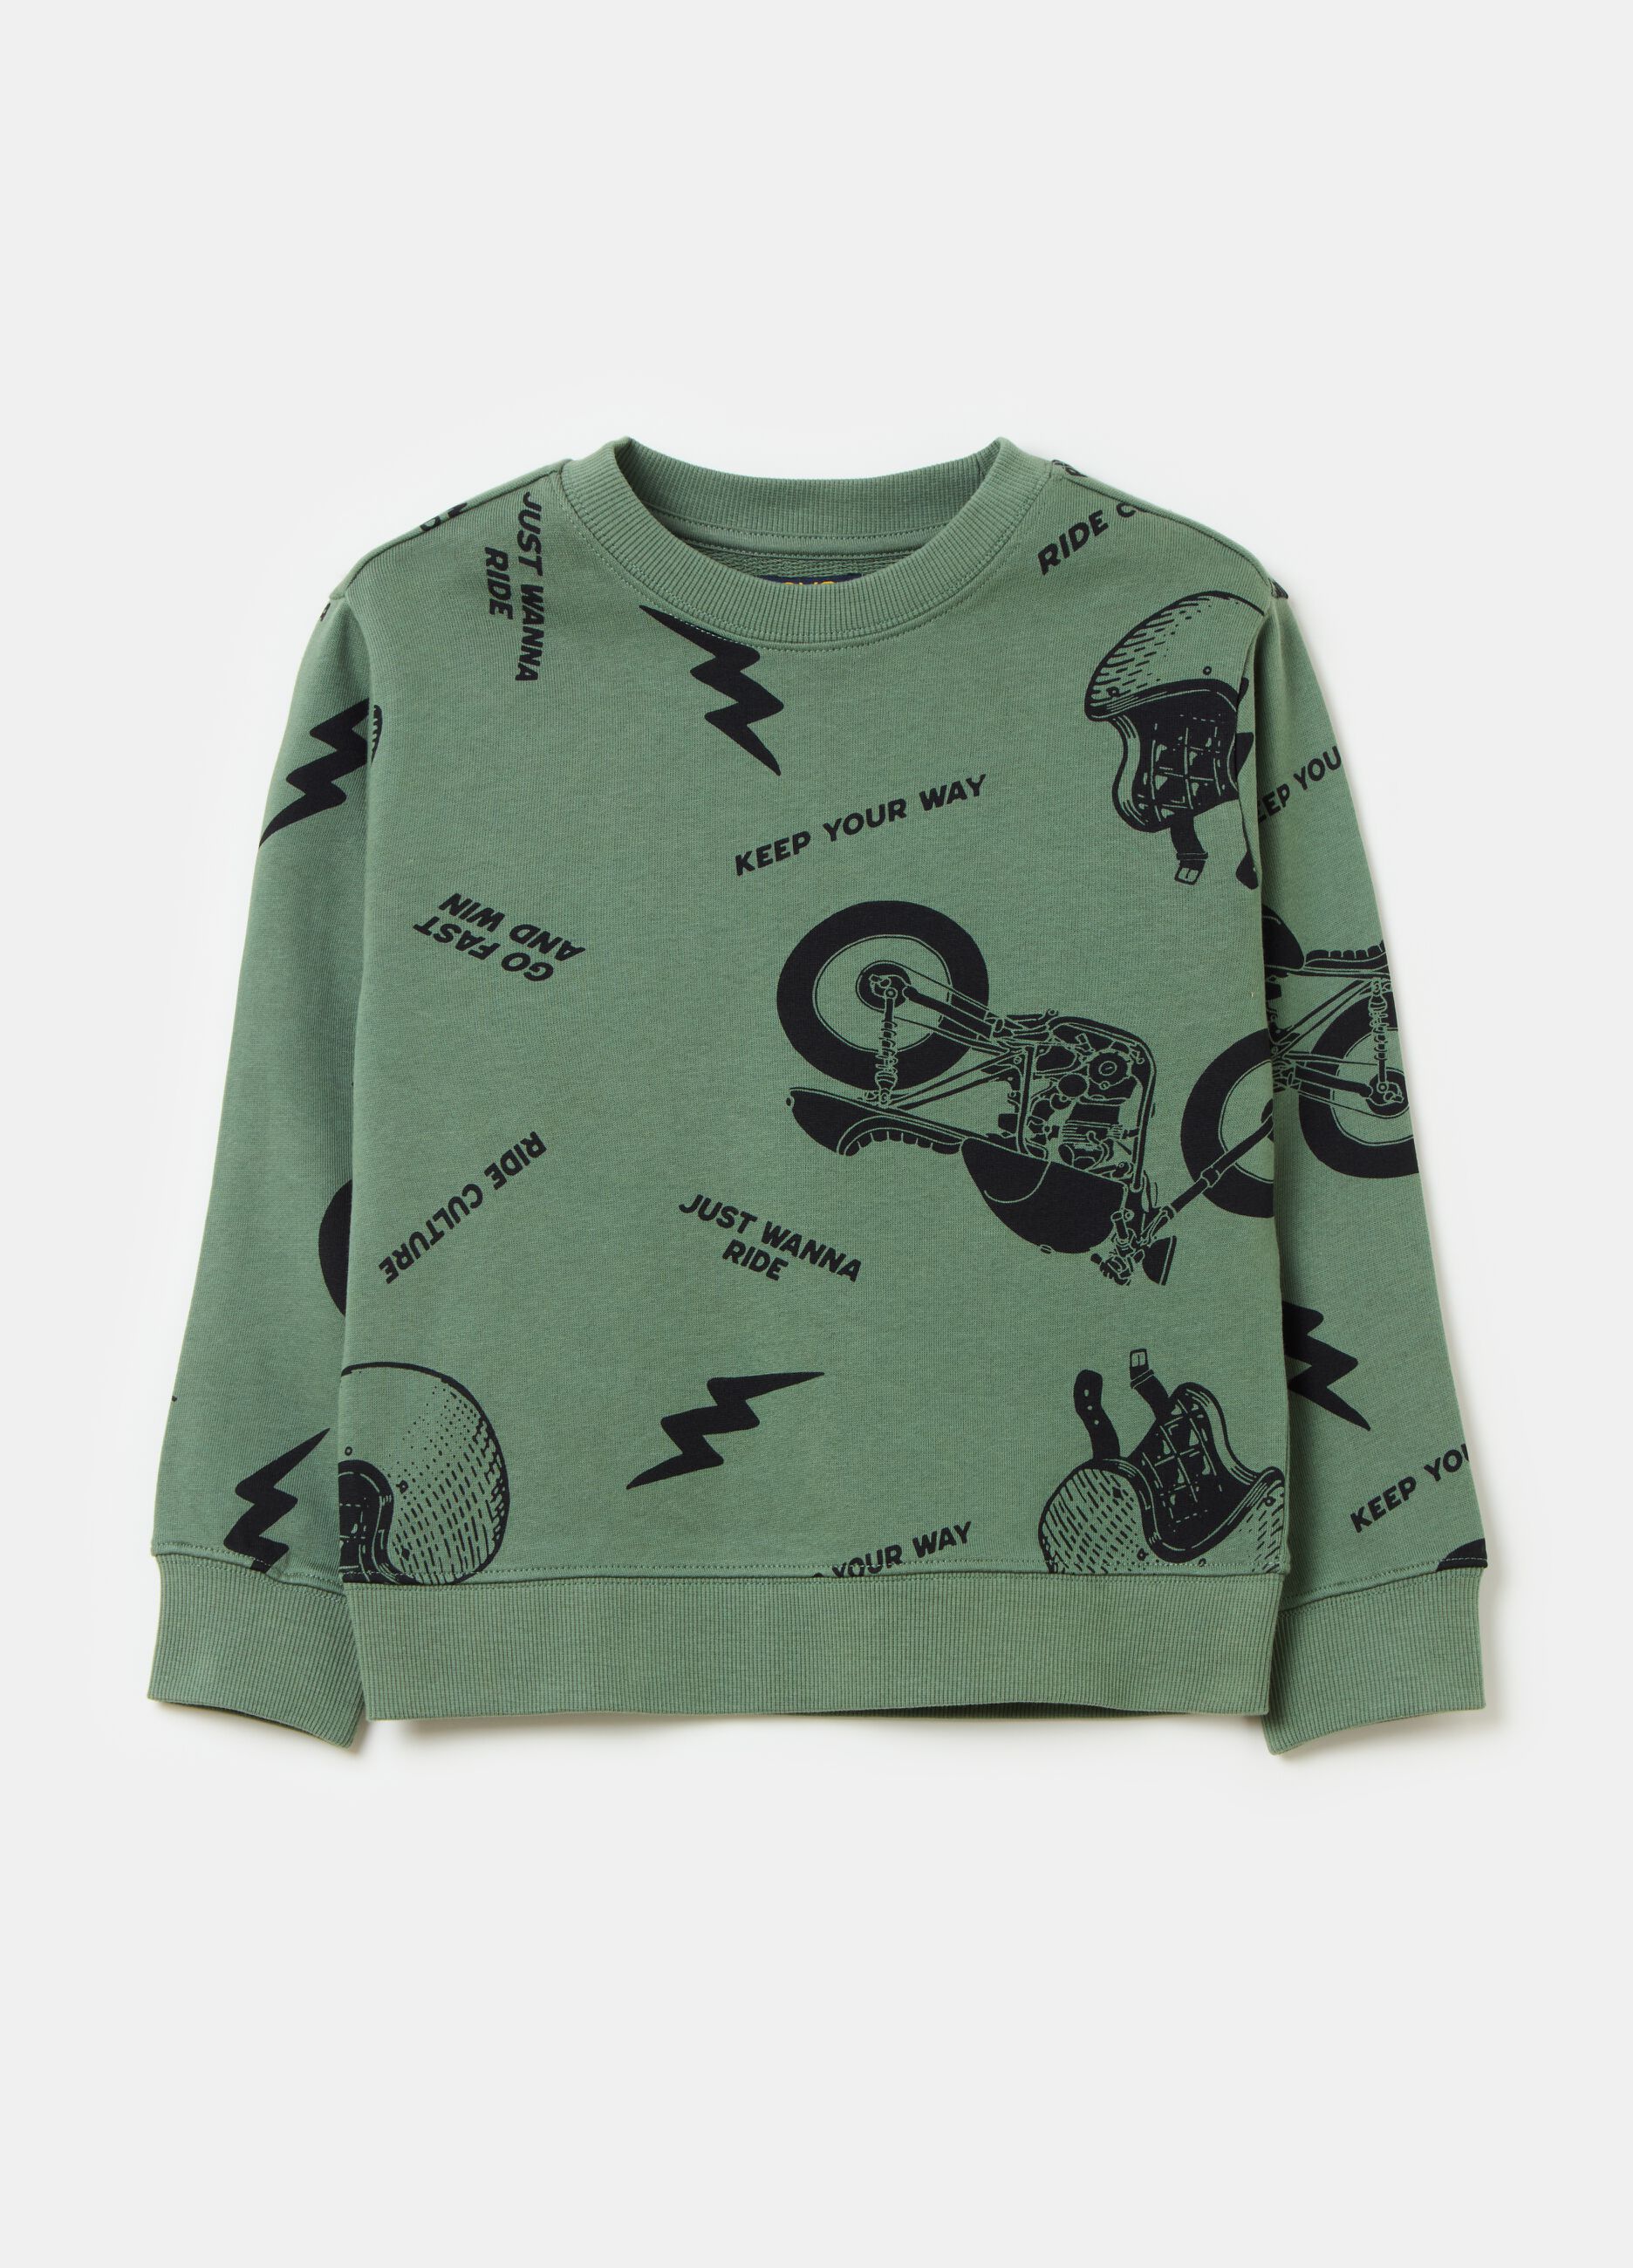 Sweatshirt with all-over motorbikes print